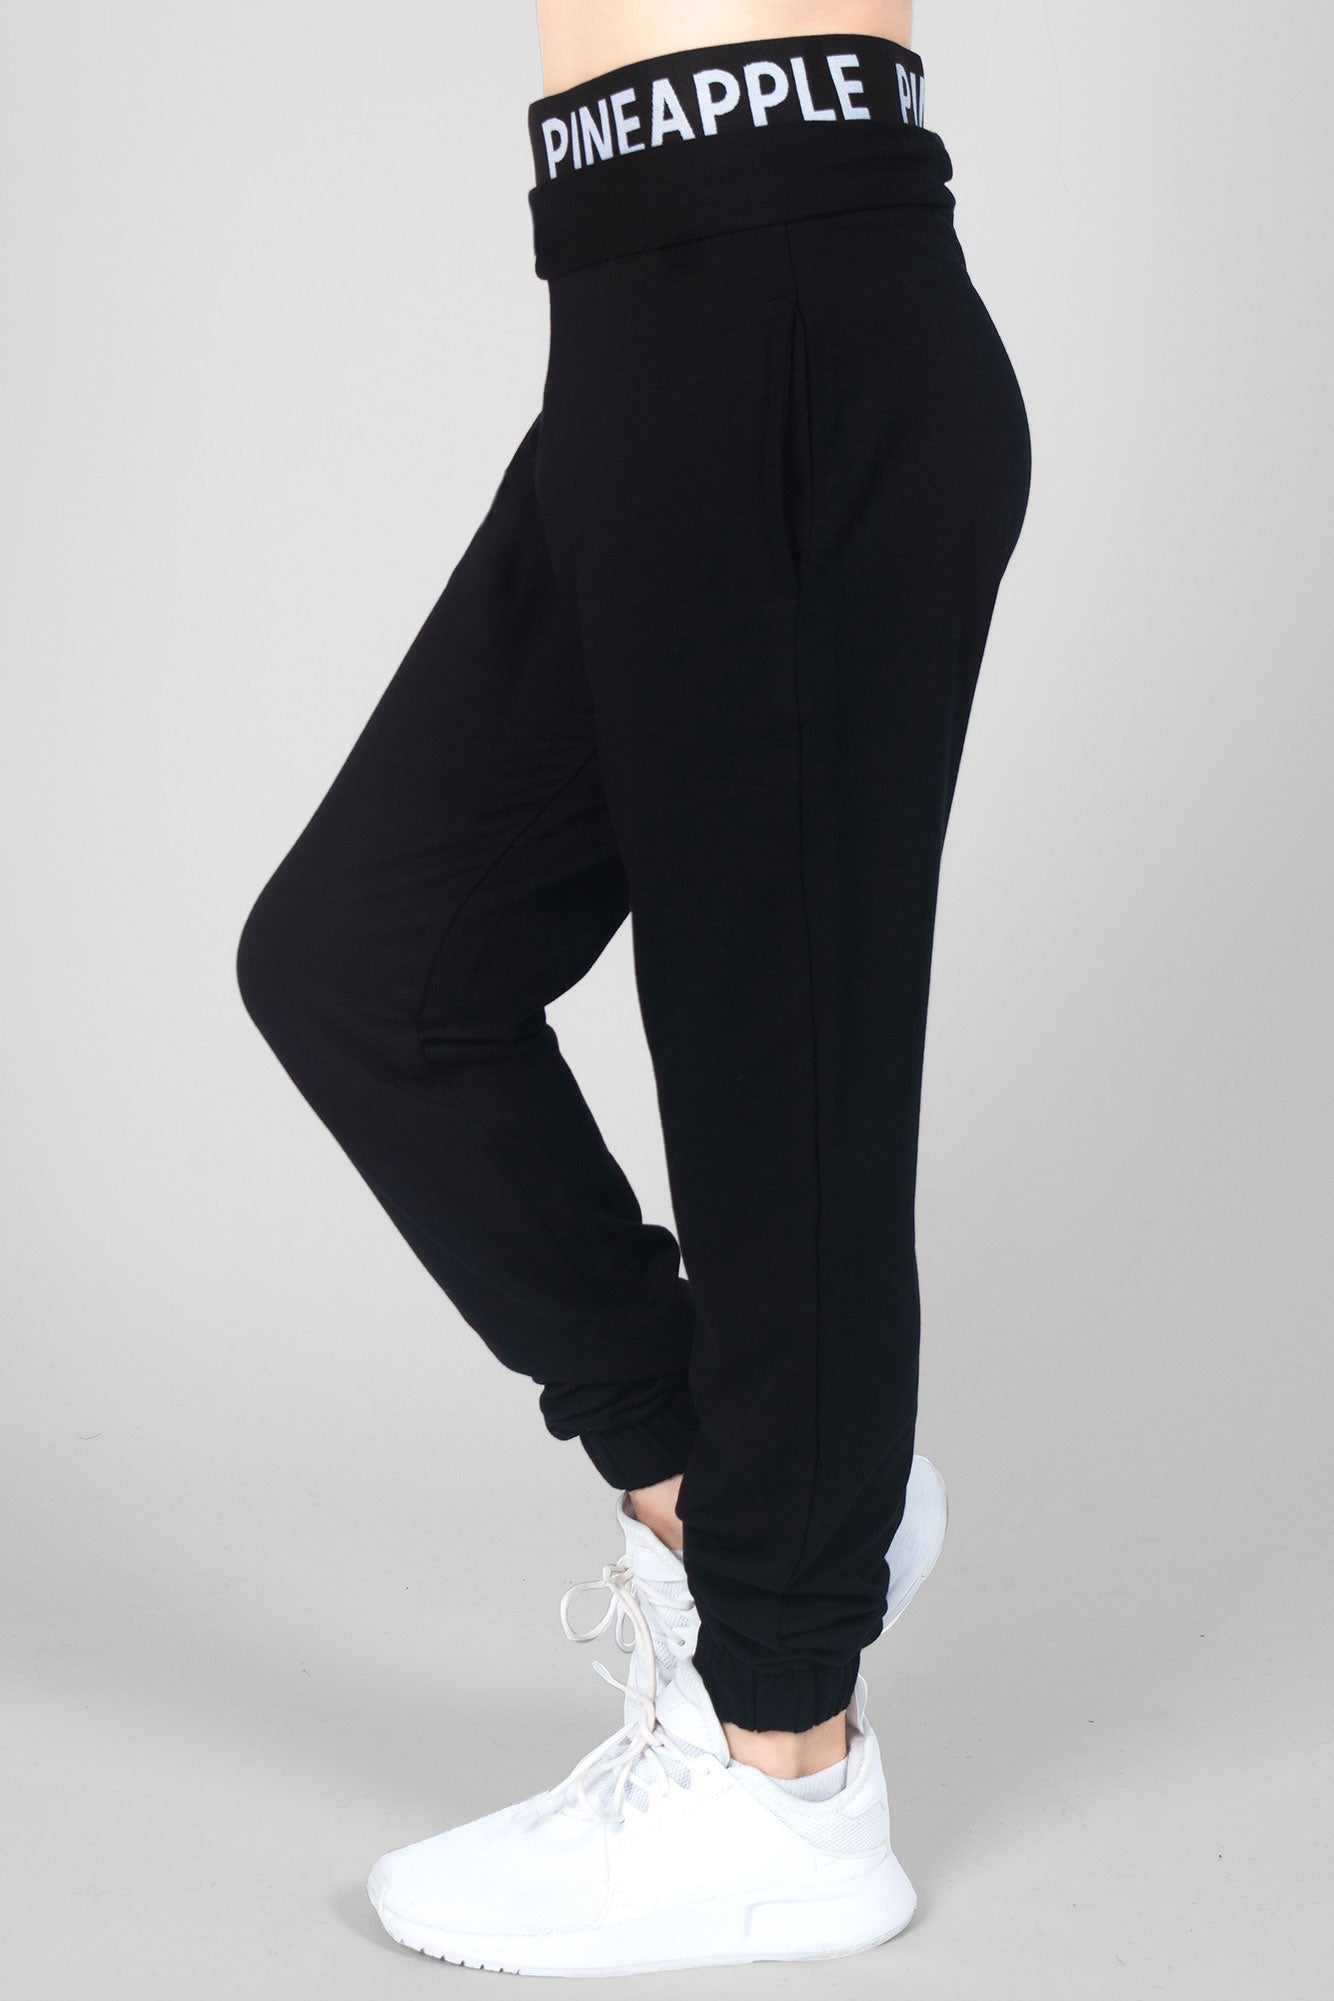 Nike Black & White Side-Stripe Track Pants | Best Price and Reviews | Zulily